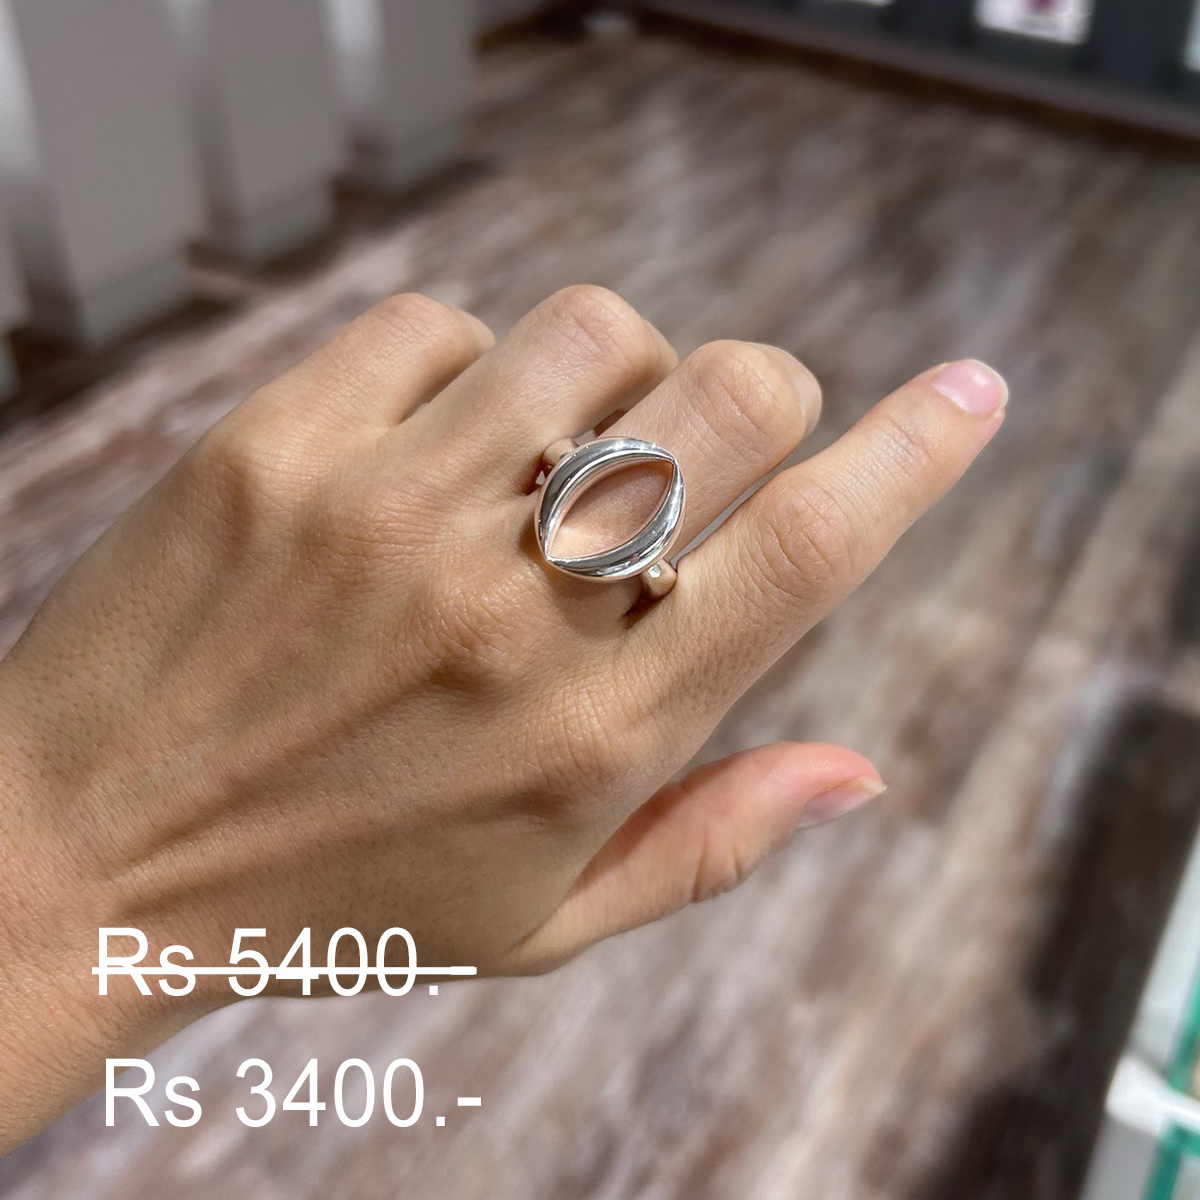 Discounted polished silver ring